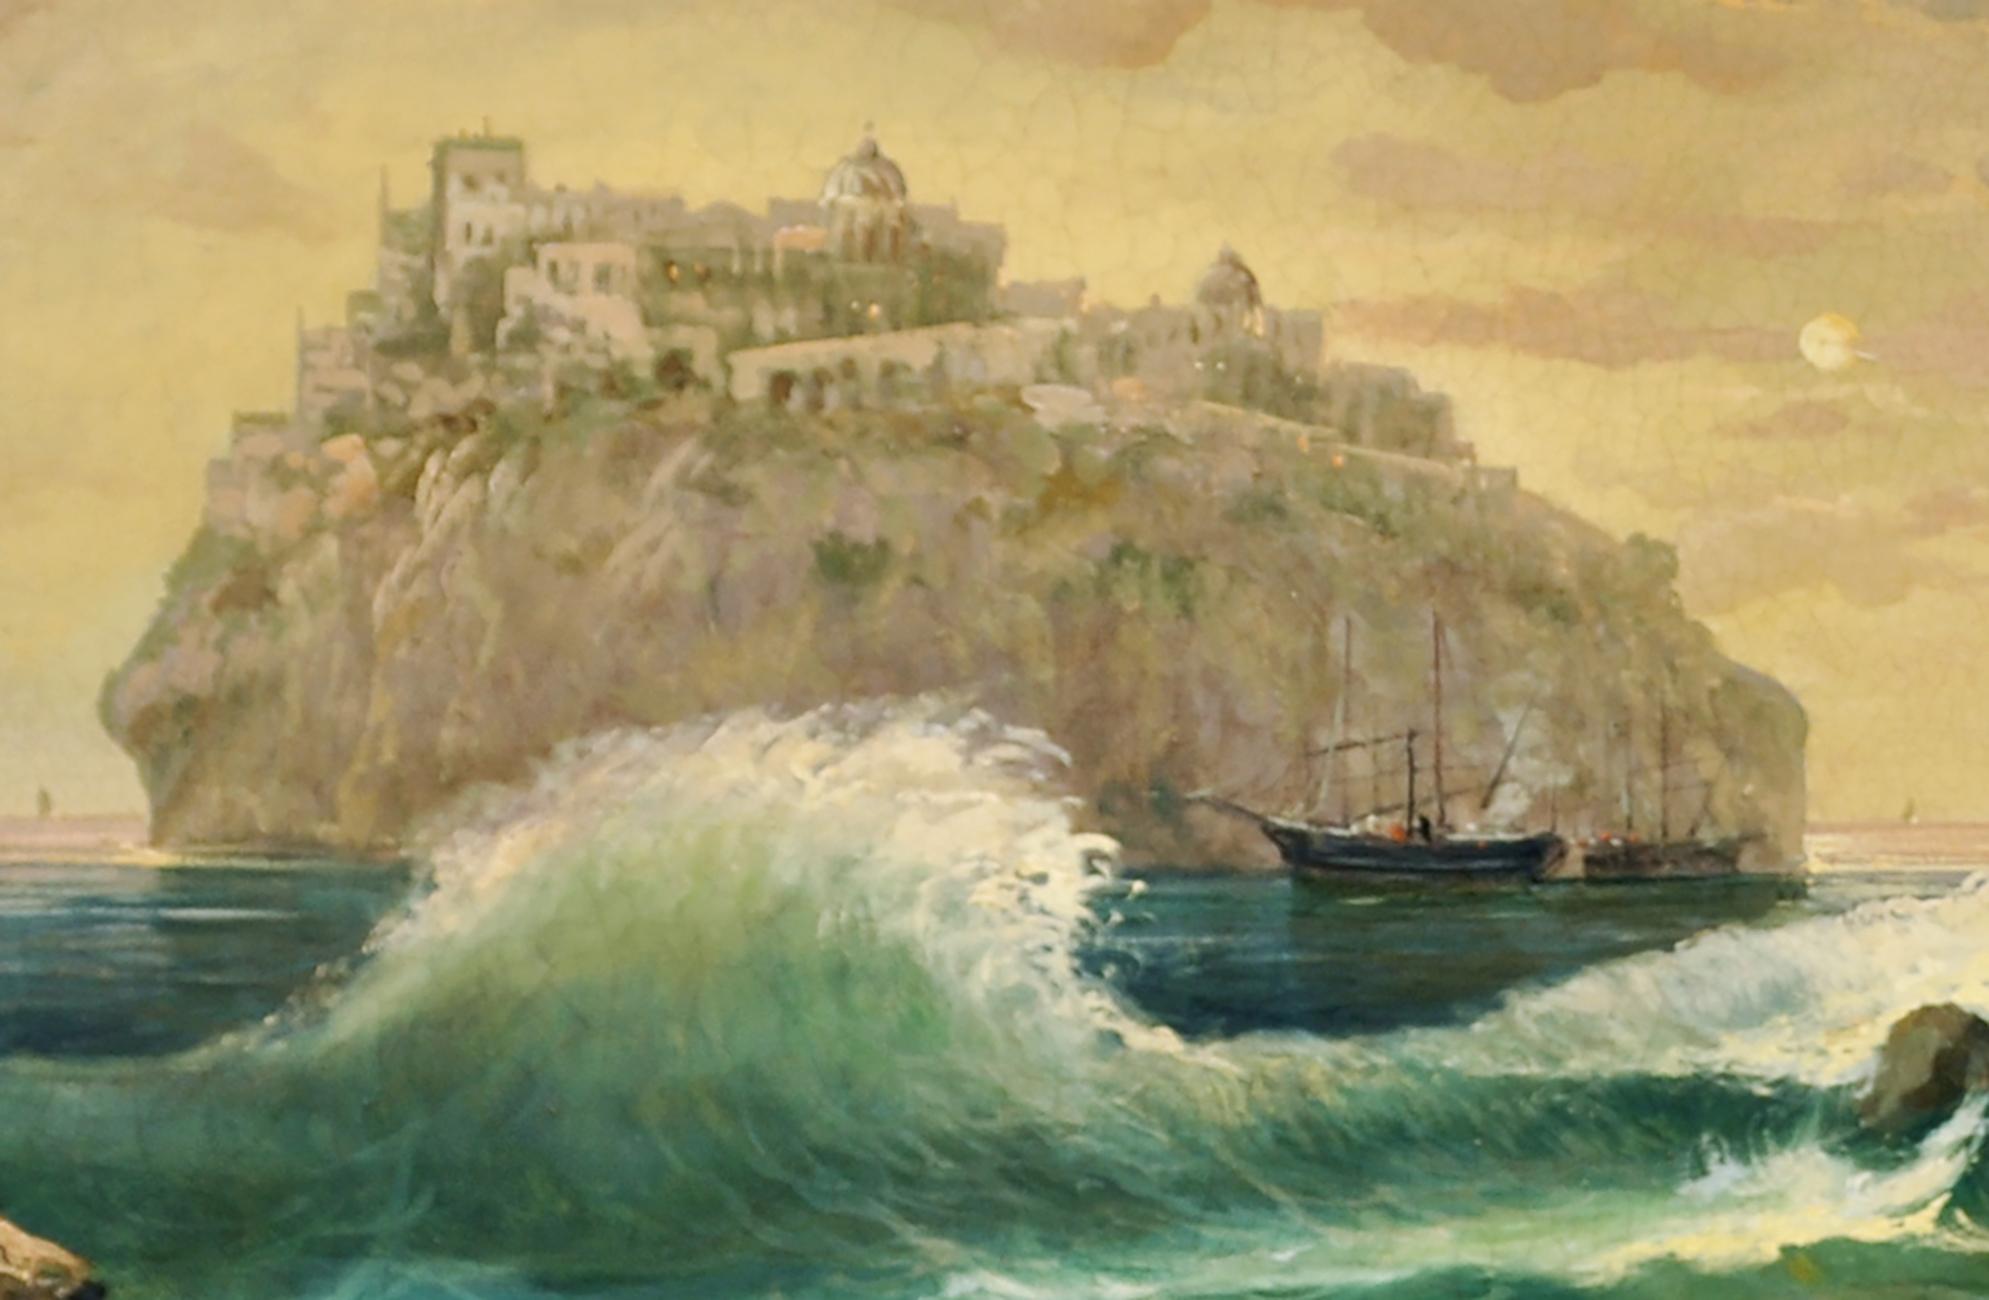 Ischia - Vincenzo Montella Italia 2008 - Oil on canvas cm. 50x100
V. Montella's painting depicts a perspective of the island of Ischia, muse of many artists over the centuries. Artists who have been undoubtedly fascinated by our land, creating